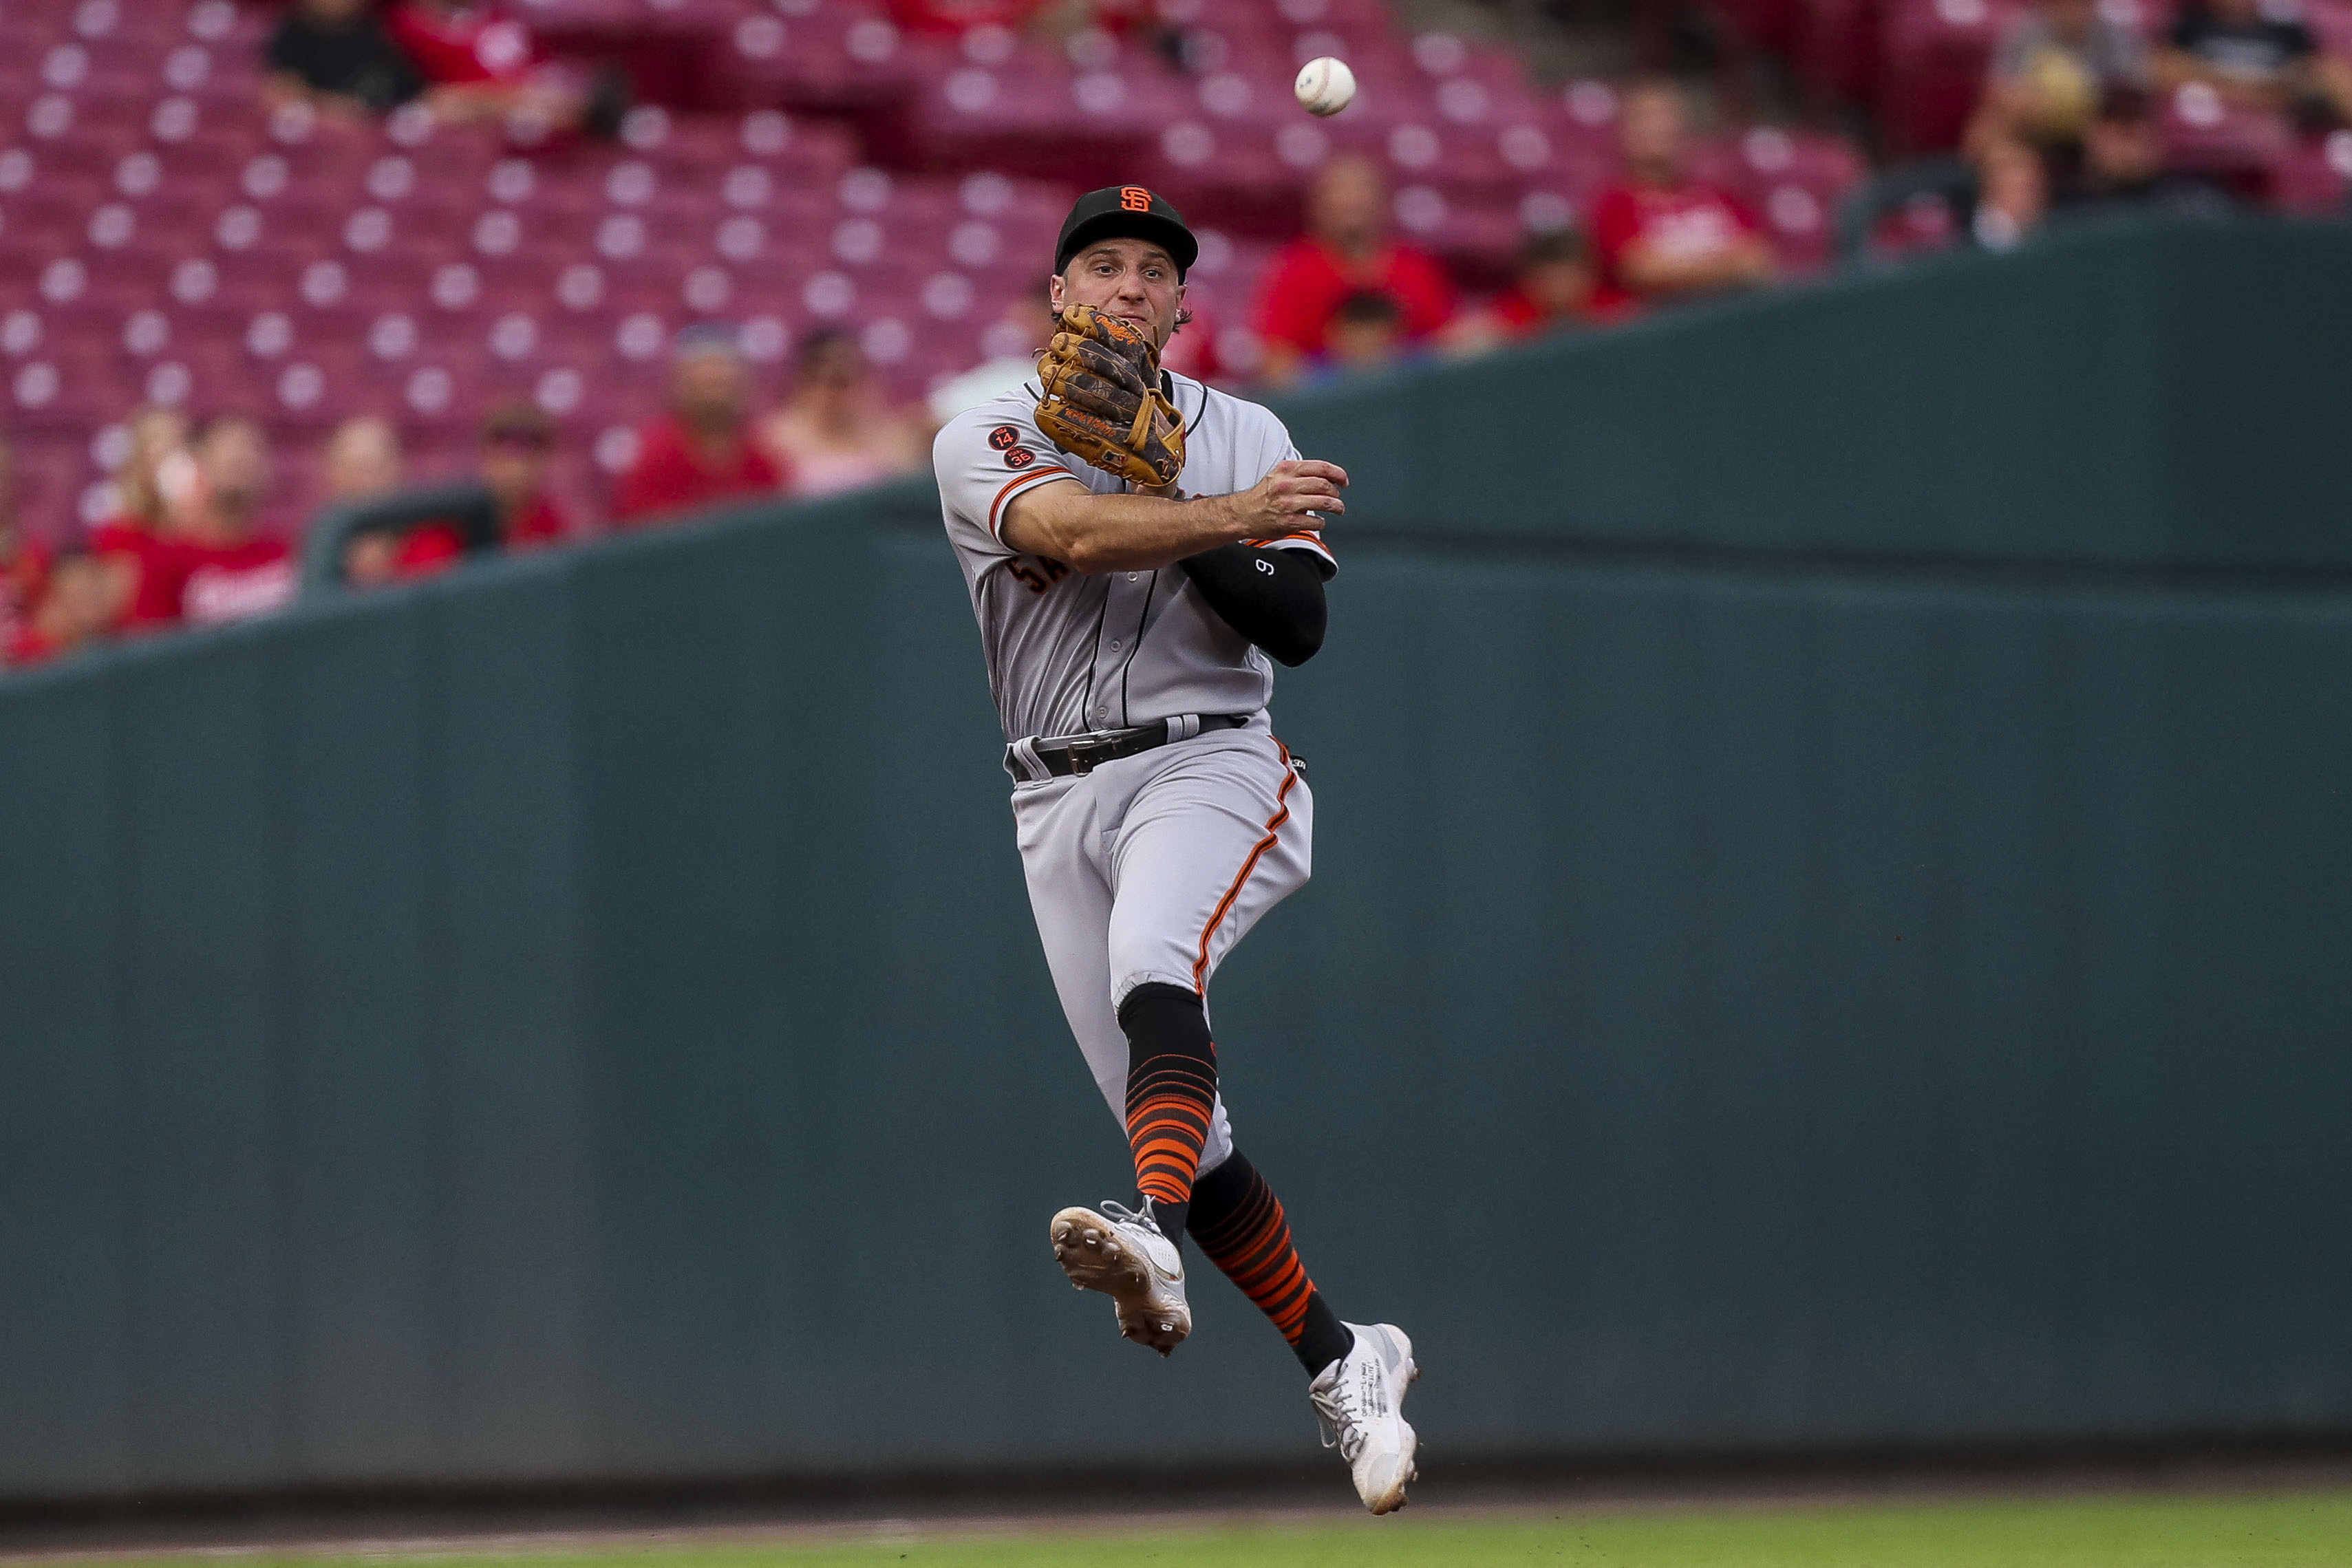 Giants-Reds suspended with game tied in 8th